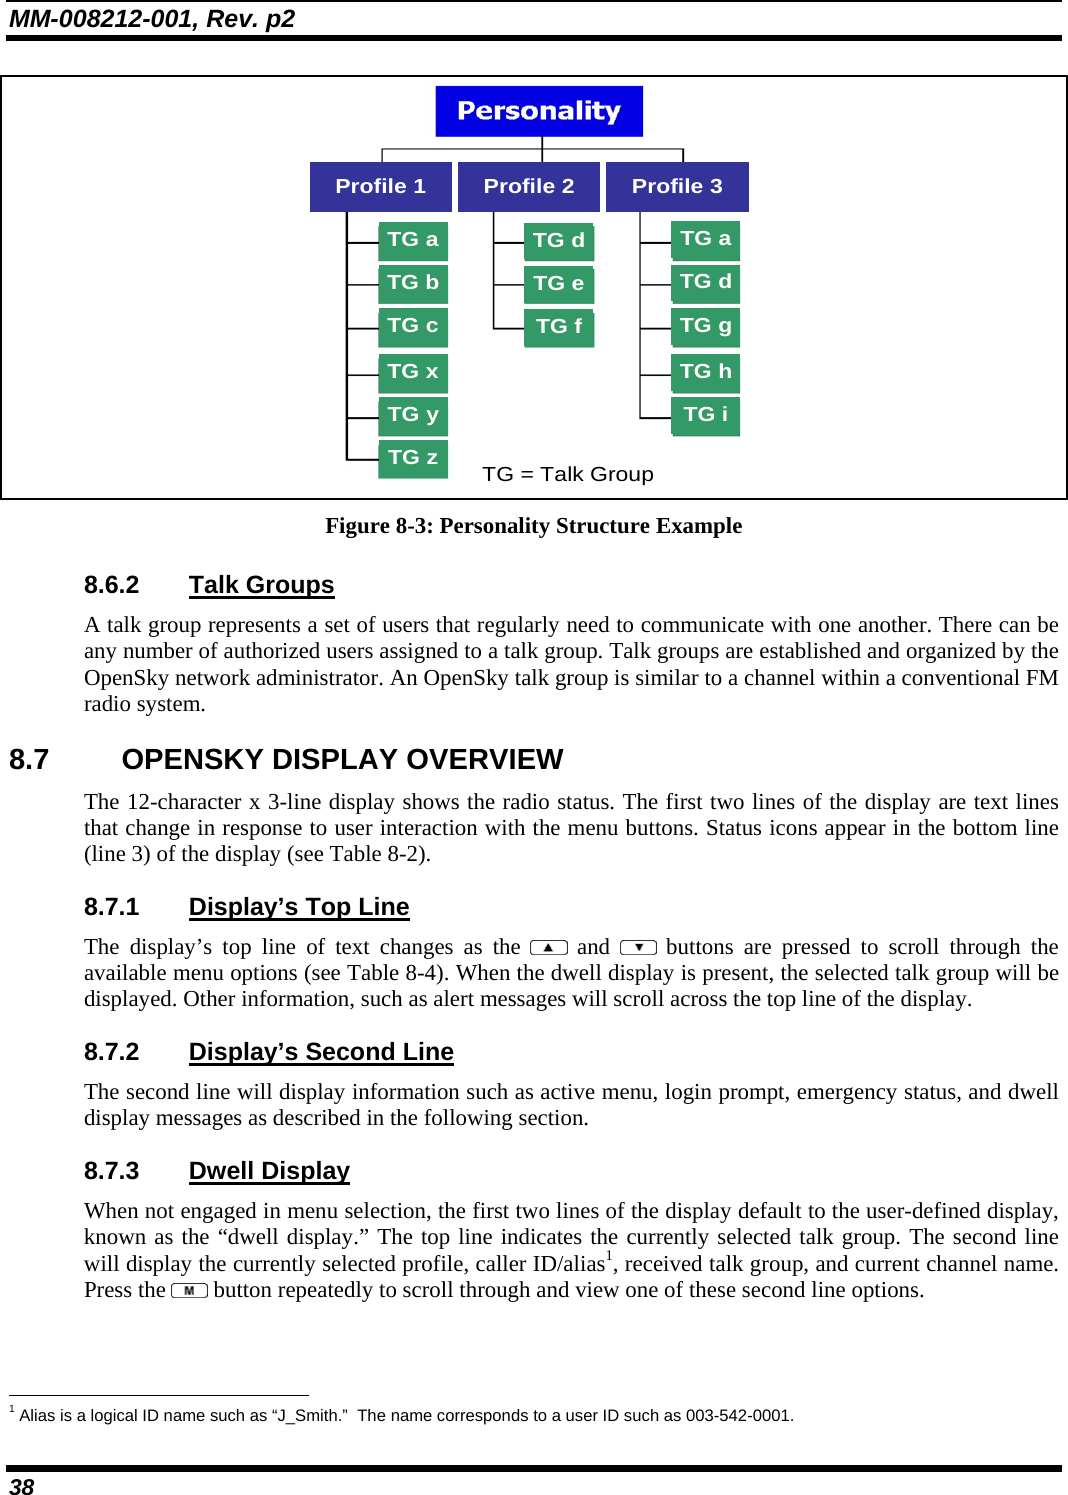 MM-008212-001, Rev. p2 38  TG a TG b TG c TG x TG y TG z TG dTG eTG fTG aTG dTG gTG hTG iTG = Talk Group Profile 1  Profile 2  Profile 3  Figure 8-3: Personality Structure Example 8.6.2 Talk Groups A talk group represents a set of users that regularly need to communicate with one another. There can be any number of authorized users assigned to a talk group. Talk groups are established and organized by the OpenSky network administrator. An OpenSky talk group is similar to a channel within a conventional FM radio system. 8.7  OPENSKY DISPLAY OVERVIEW The 12-character x 3-line display shows the radio status. The first two lines of the display are text lines that change in response to user interaction with the menu buttons. Status icons appear in the bottom line (line 3) of the display (see Table 8-2).  8.7.1 Display’s Top Line The display’s top line of text changes as the   and   buttons are pressed to scroll through the available menu options (see Table 8-4). When the dwell display is present, the selected talk group will be displayed. Other information, such as alert messages will scroll across the top line of the display. 8.7.2 Display’s Second Line The second line will display information such as active menu, login prompt, emergency status, and dwell display messages as described in the following section.  8.7.3 Dwell Display When not engaged in menu selection, the first two lines of the display default to the user-defined display, known as the “dwell display.” The top line indicates the currently selected talk group. The second line will display the currently selected profile, caller ID/alias1, received talk group, and current channel name. Press the   button repeatedly to scroll through and view one of these second line options.                                                        1 Alias is a logical ID name such as “J_Smith.”  The name corresponds to a user ID such as 003-542-0001. 